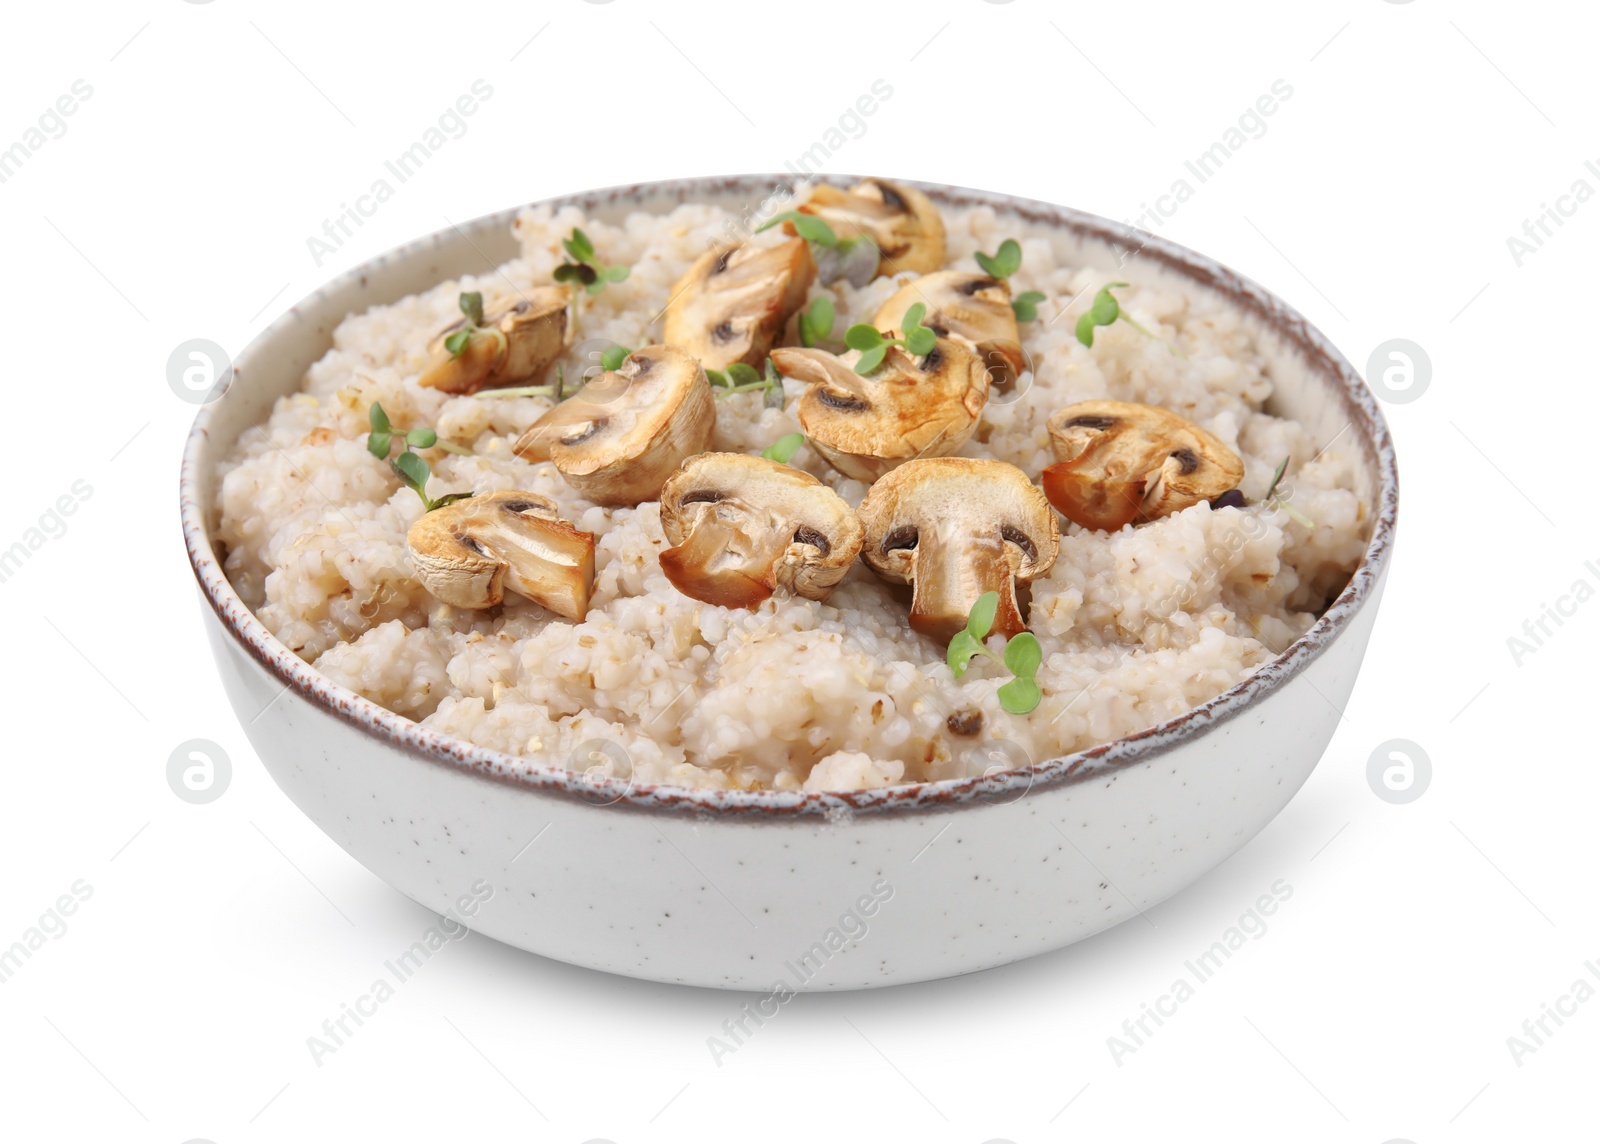 Photo of Delicious barley porridge with mushrooms and microgreens in bowl isolated on white